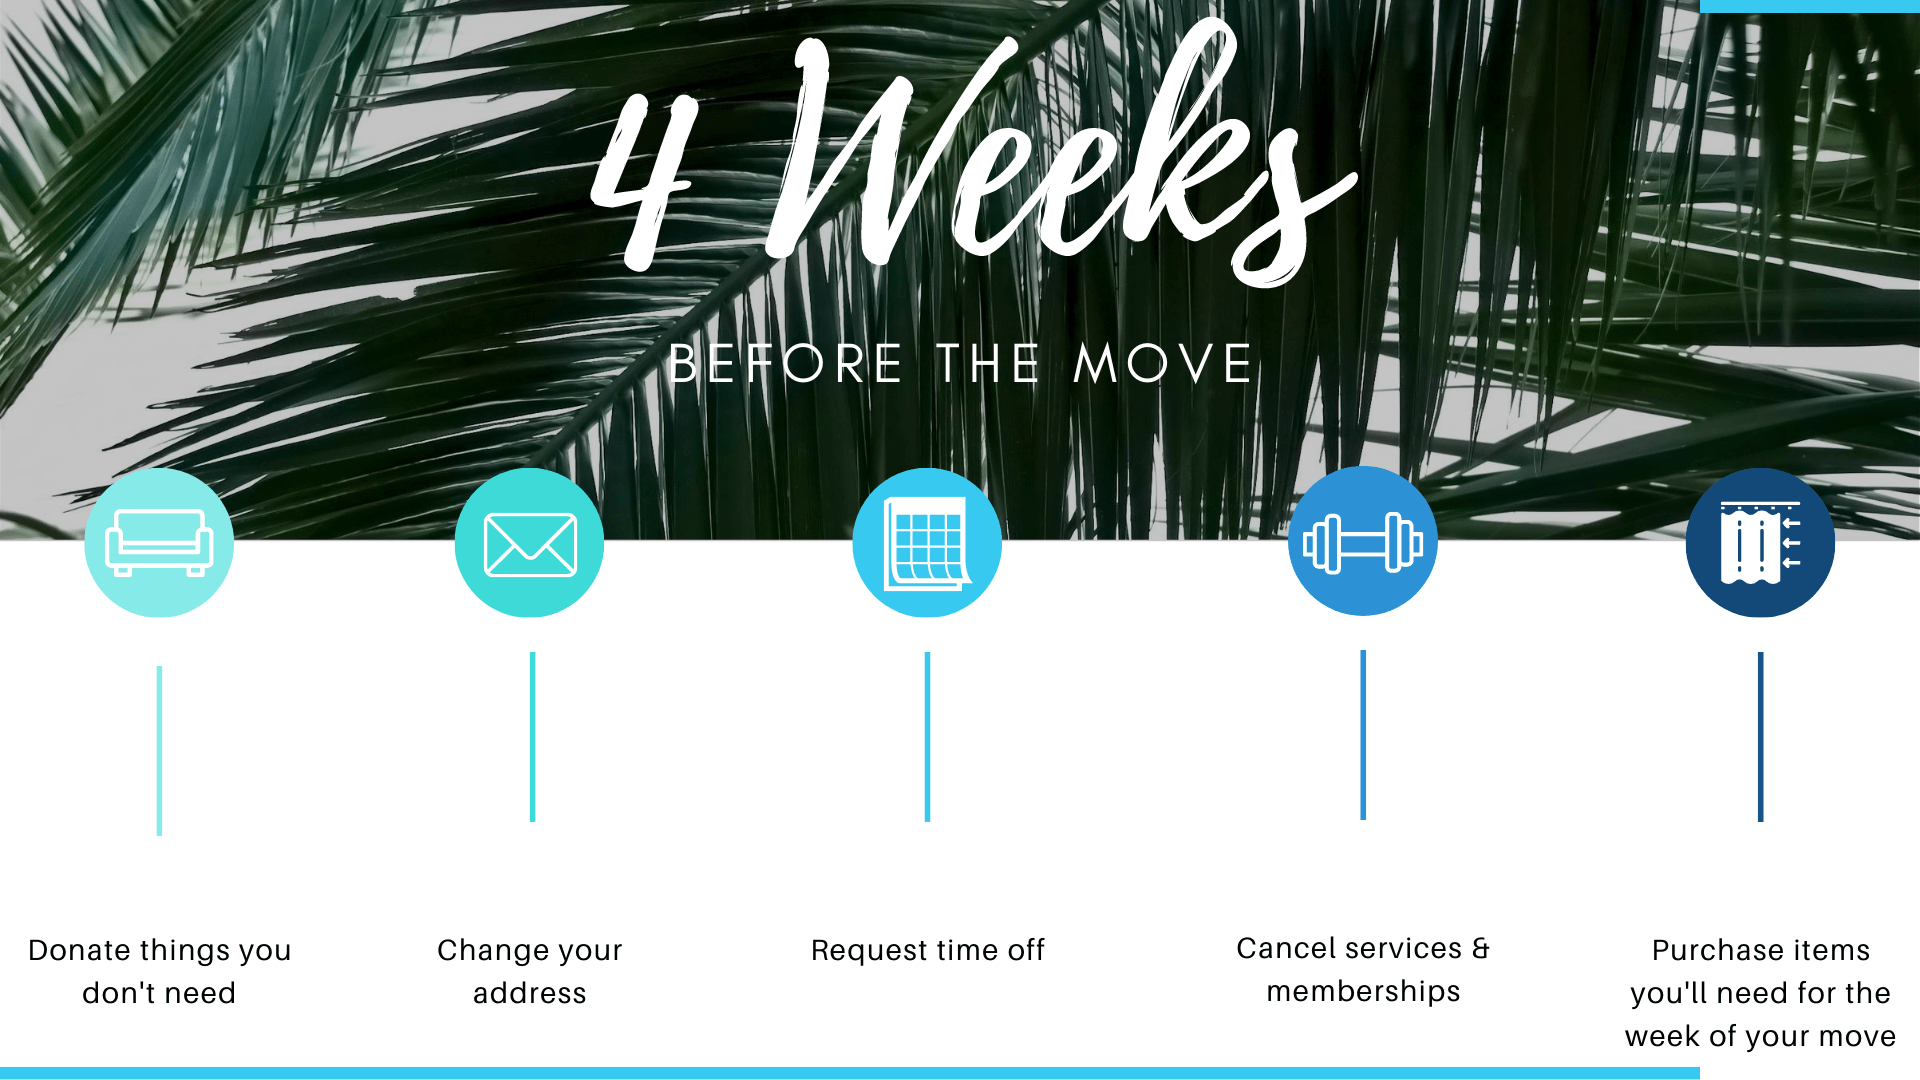 what to do 4 weeks before the move date